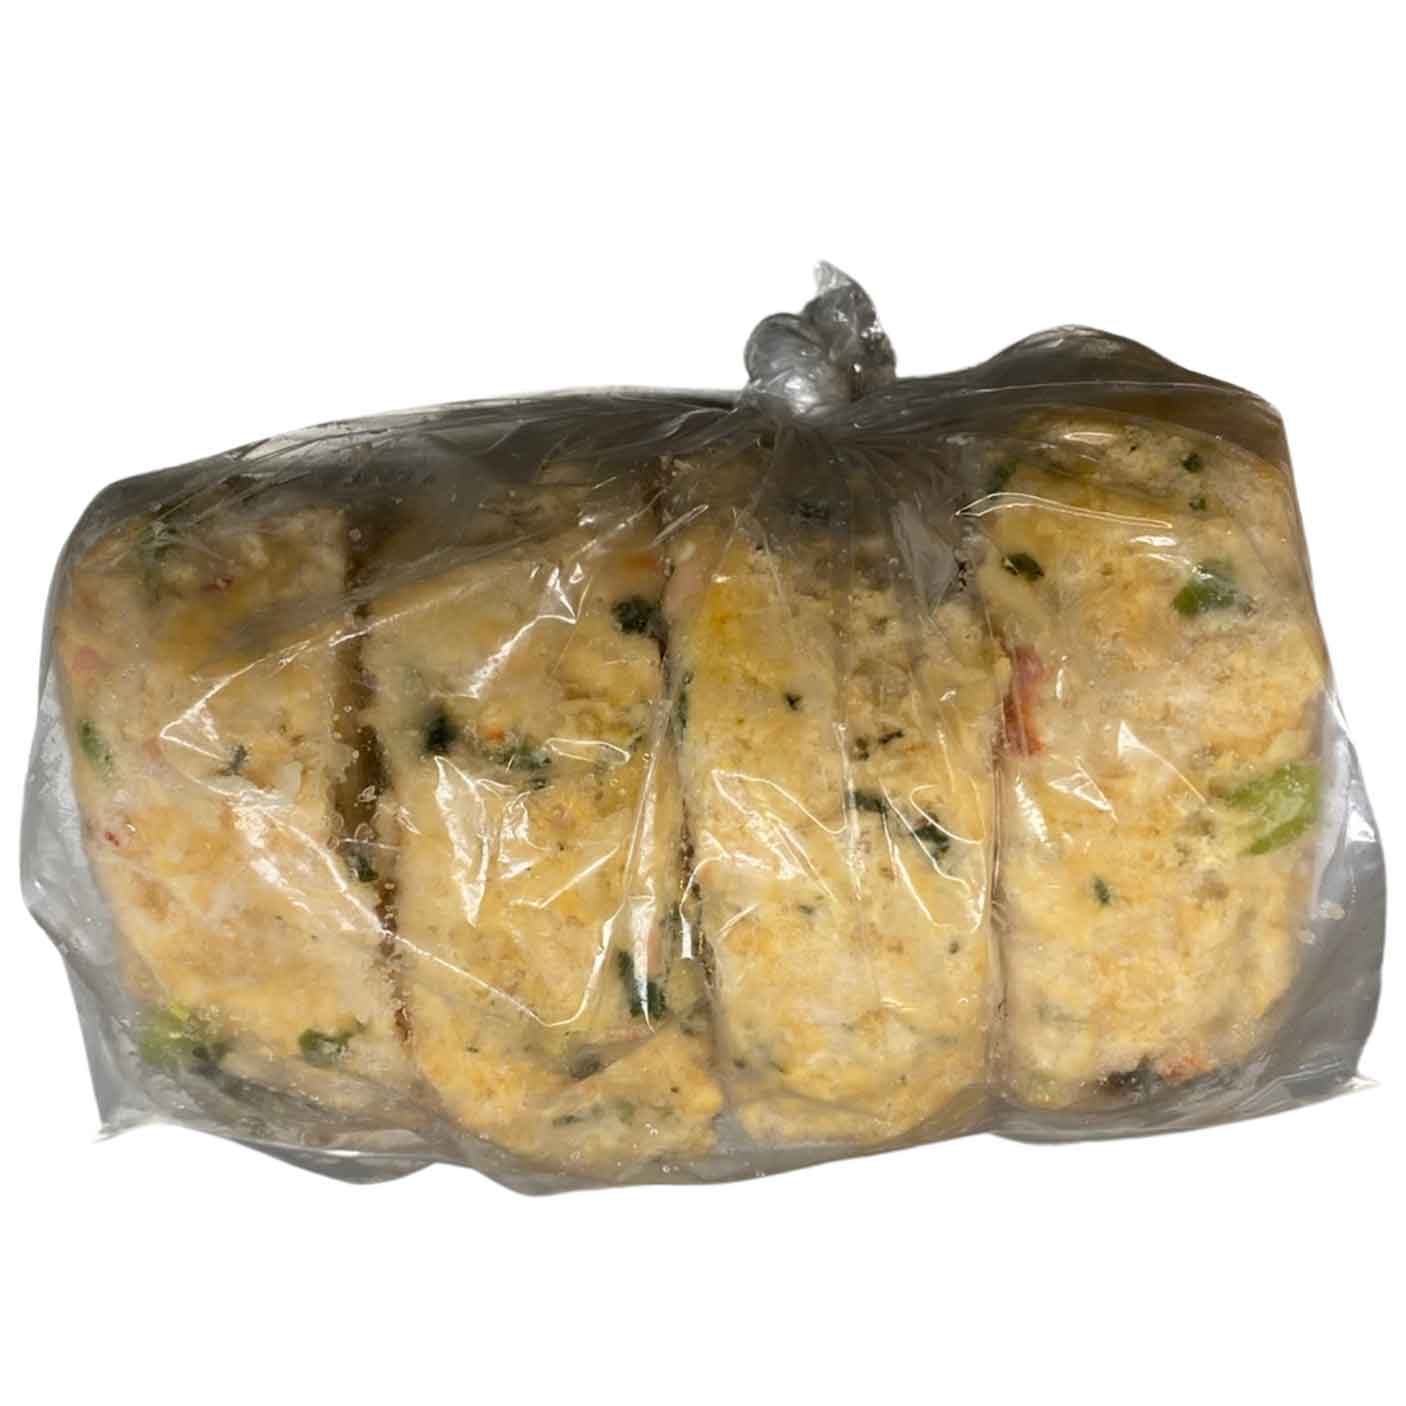 Cakes - Crab Seafood Cakes 2.5oz x 4pack